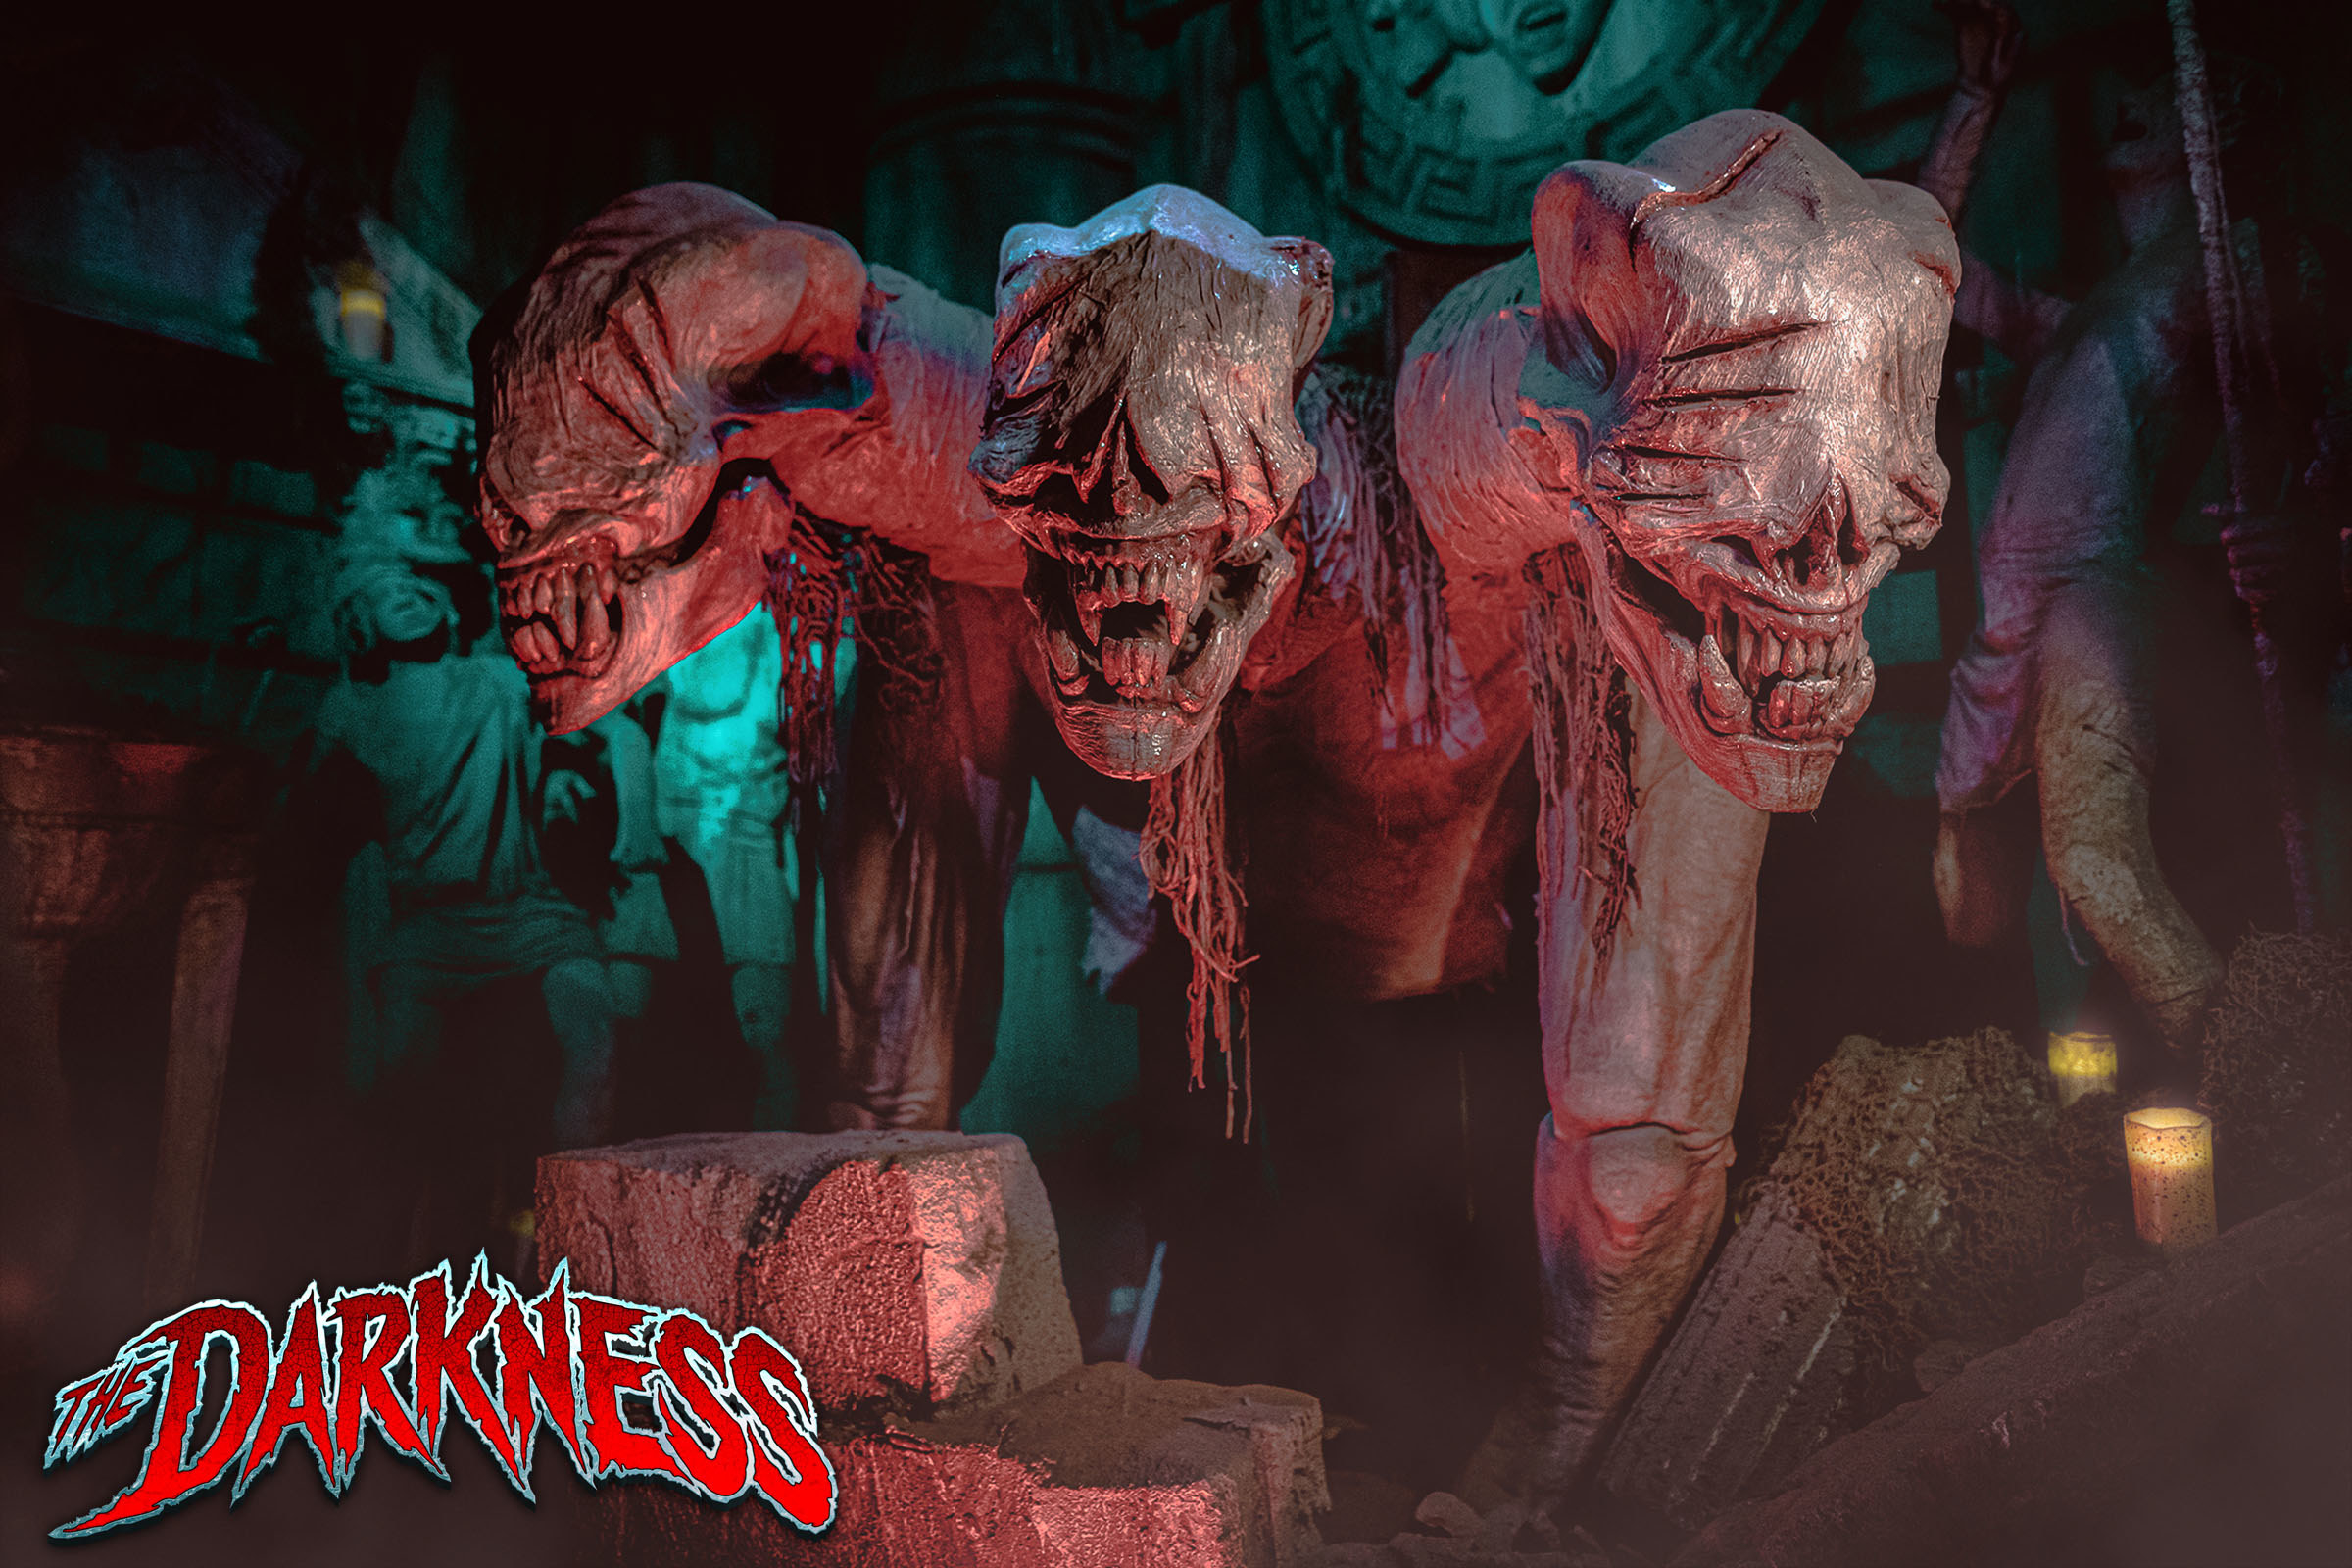 A three-headed creature lunges out at guests at &quot;The Darkness&quot;